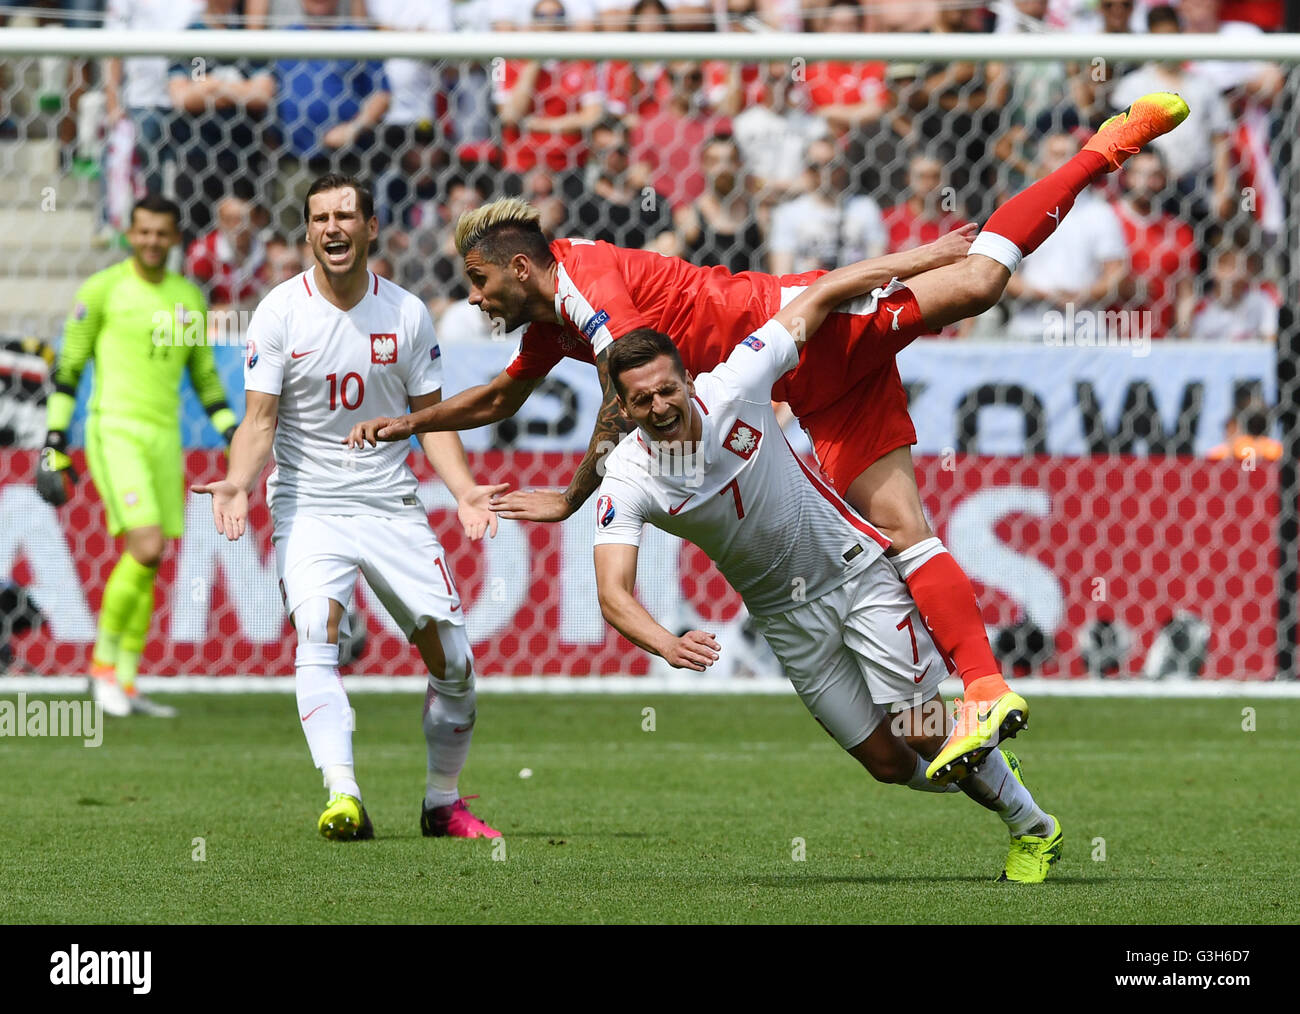 Saint-Etienne, France. 25th June, 2016. Valon Behrami of Switzerland is tripped-up by Arkadiusz Milik of Poland challenge for the ball during the UEFA EURO 2016 Round of 16 soccer match between Switzerland and Poland at the Geoffroy Guichard stadium in Saint-Etienne, France, 25 June 2016. At left is Grzegorz Krychowiak. Photo: Federico Gambarini/dpa/Alamy Live News Stock Photo